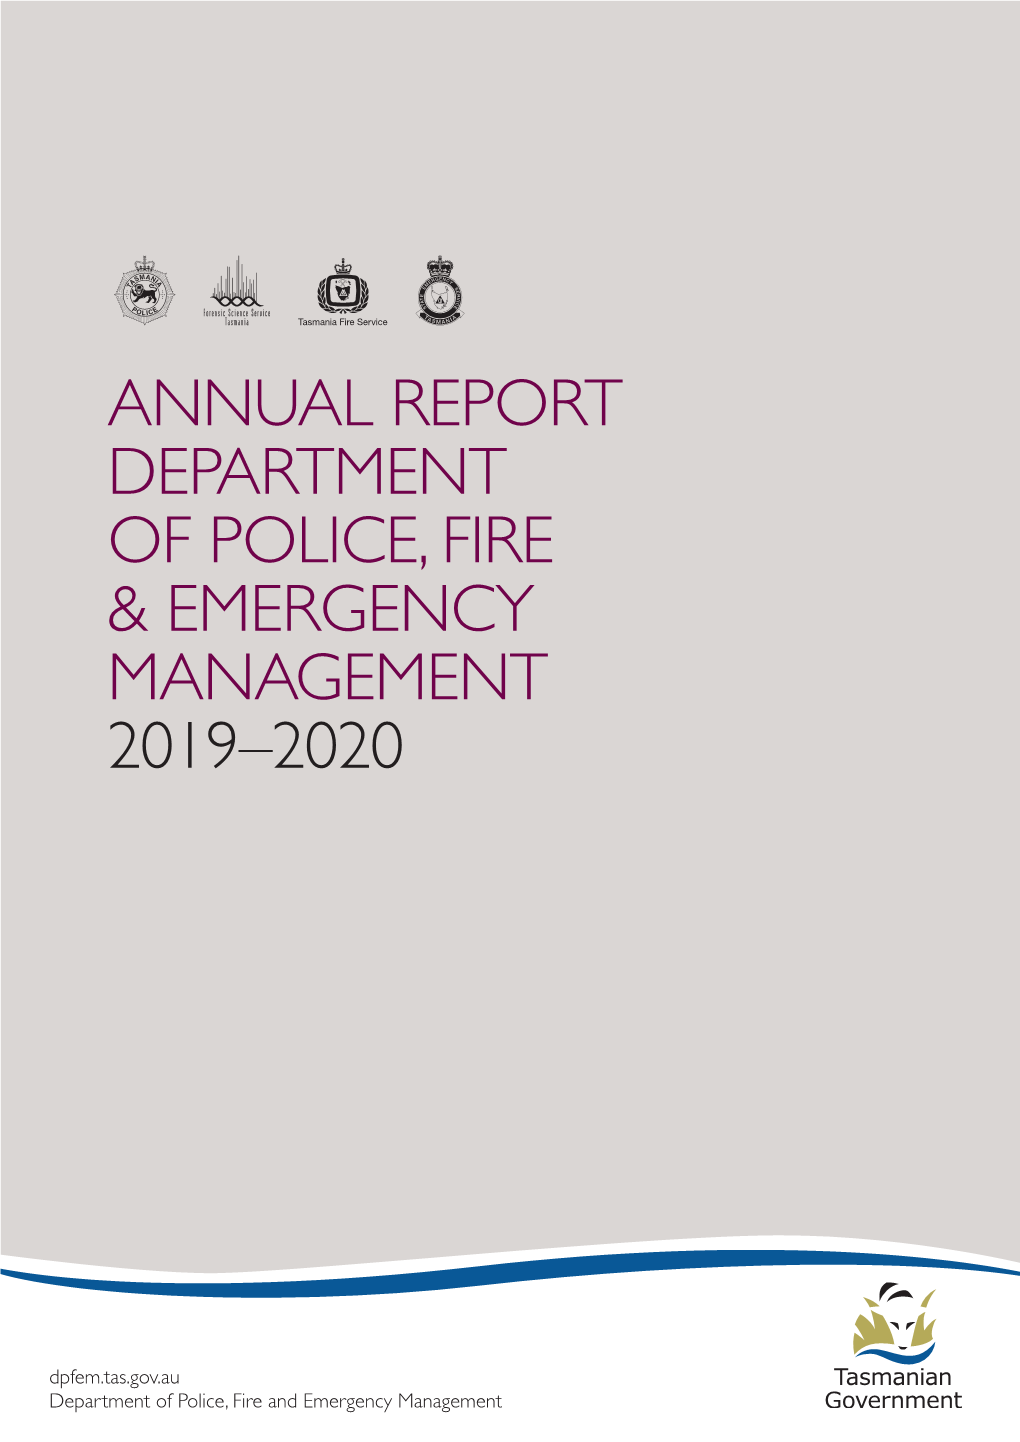 Annual Report Department of Police, Fire & Emergency Management 2019–2020